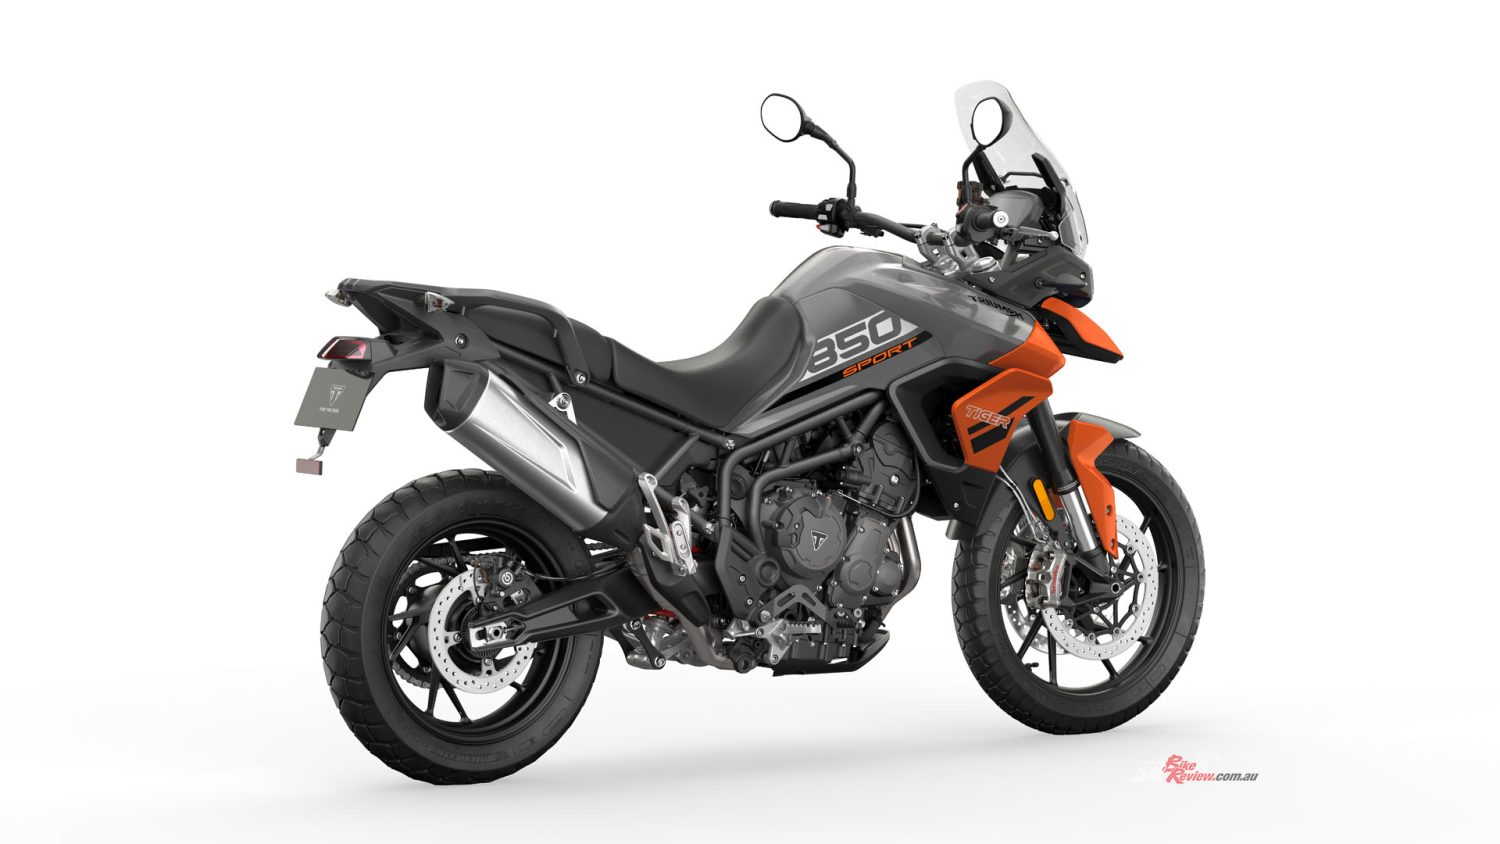 The new Graphite and Baja Orange Tiger 850 Sport is the perfect option for someone looking for a stand-out bike...